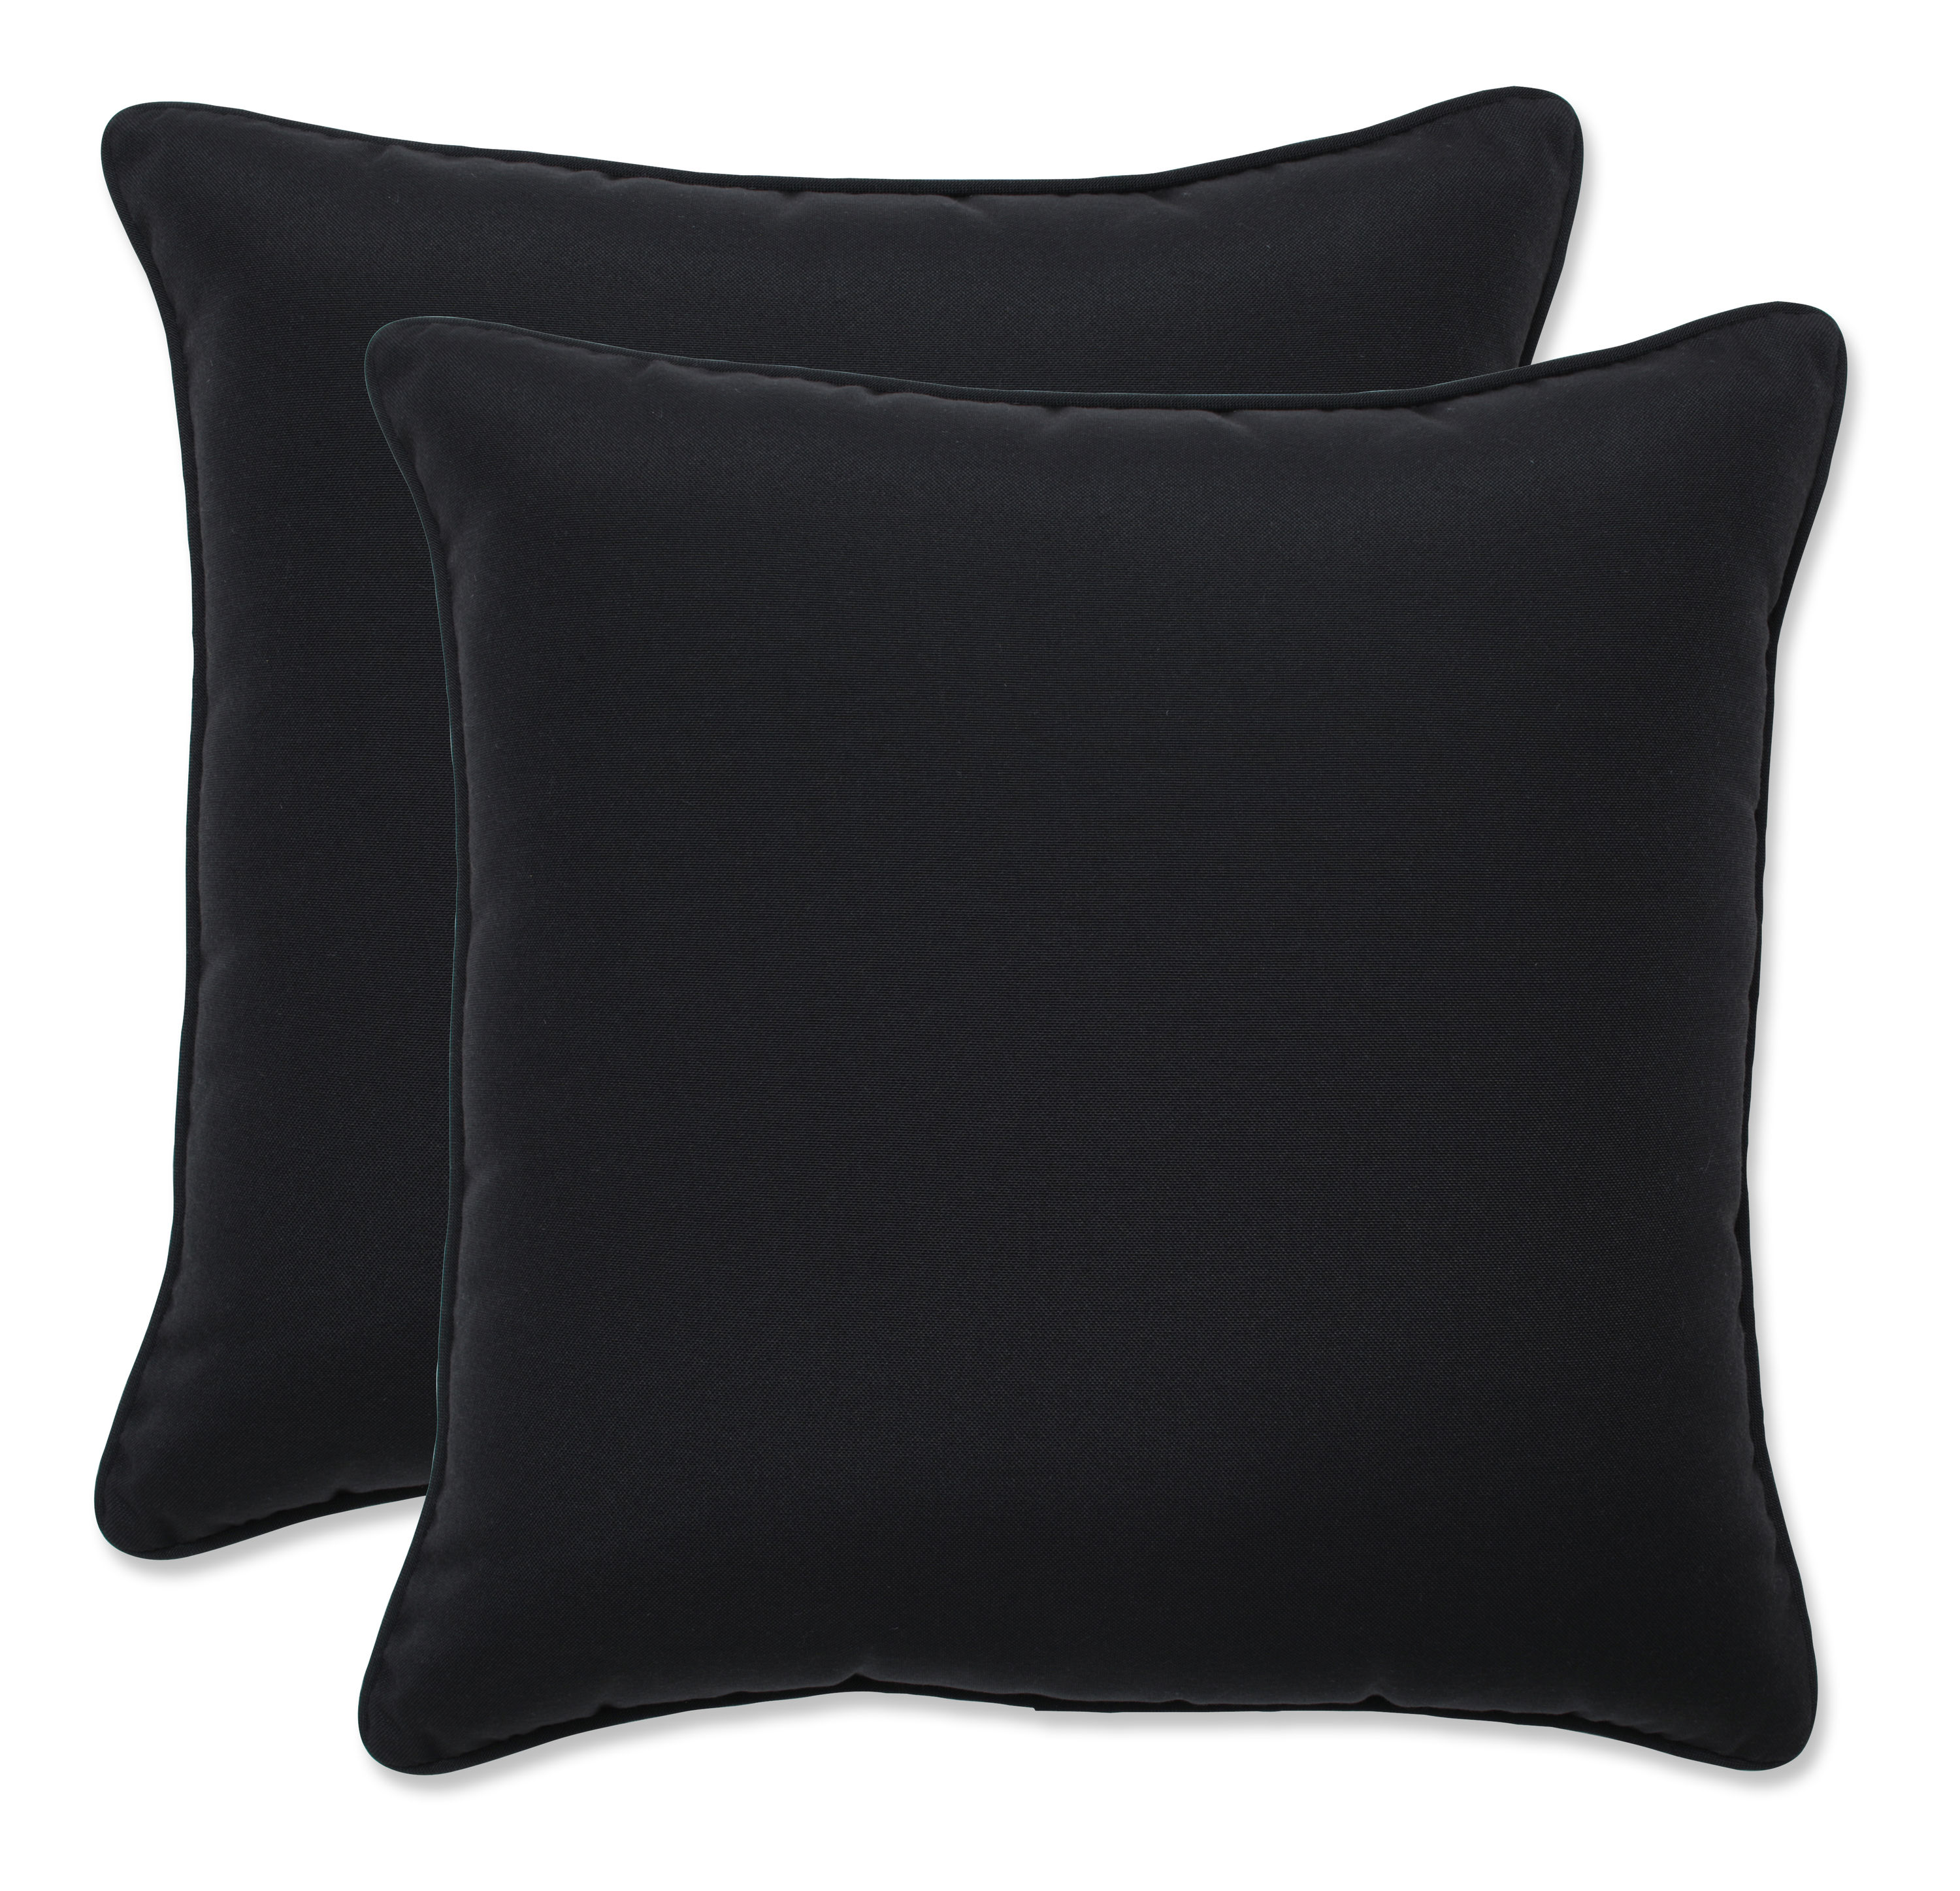 Pillow Perfect Outdoor/Indoor Dawson Pewter Throw Pillows Black 16.5 x 16.5 2 Pack 